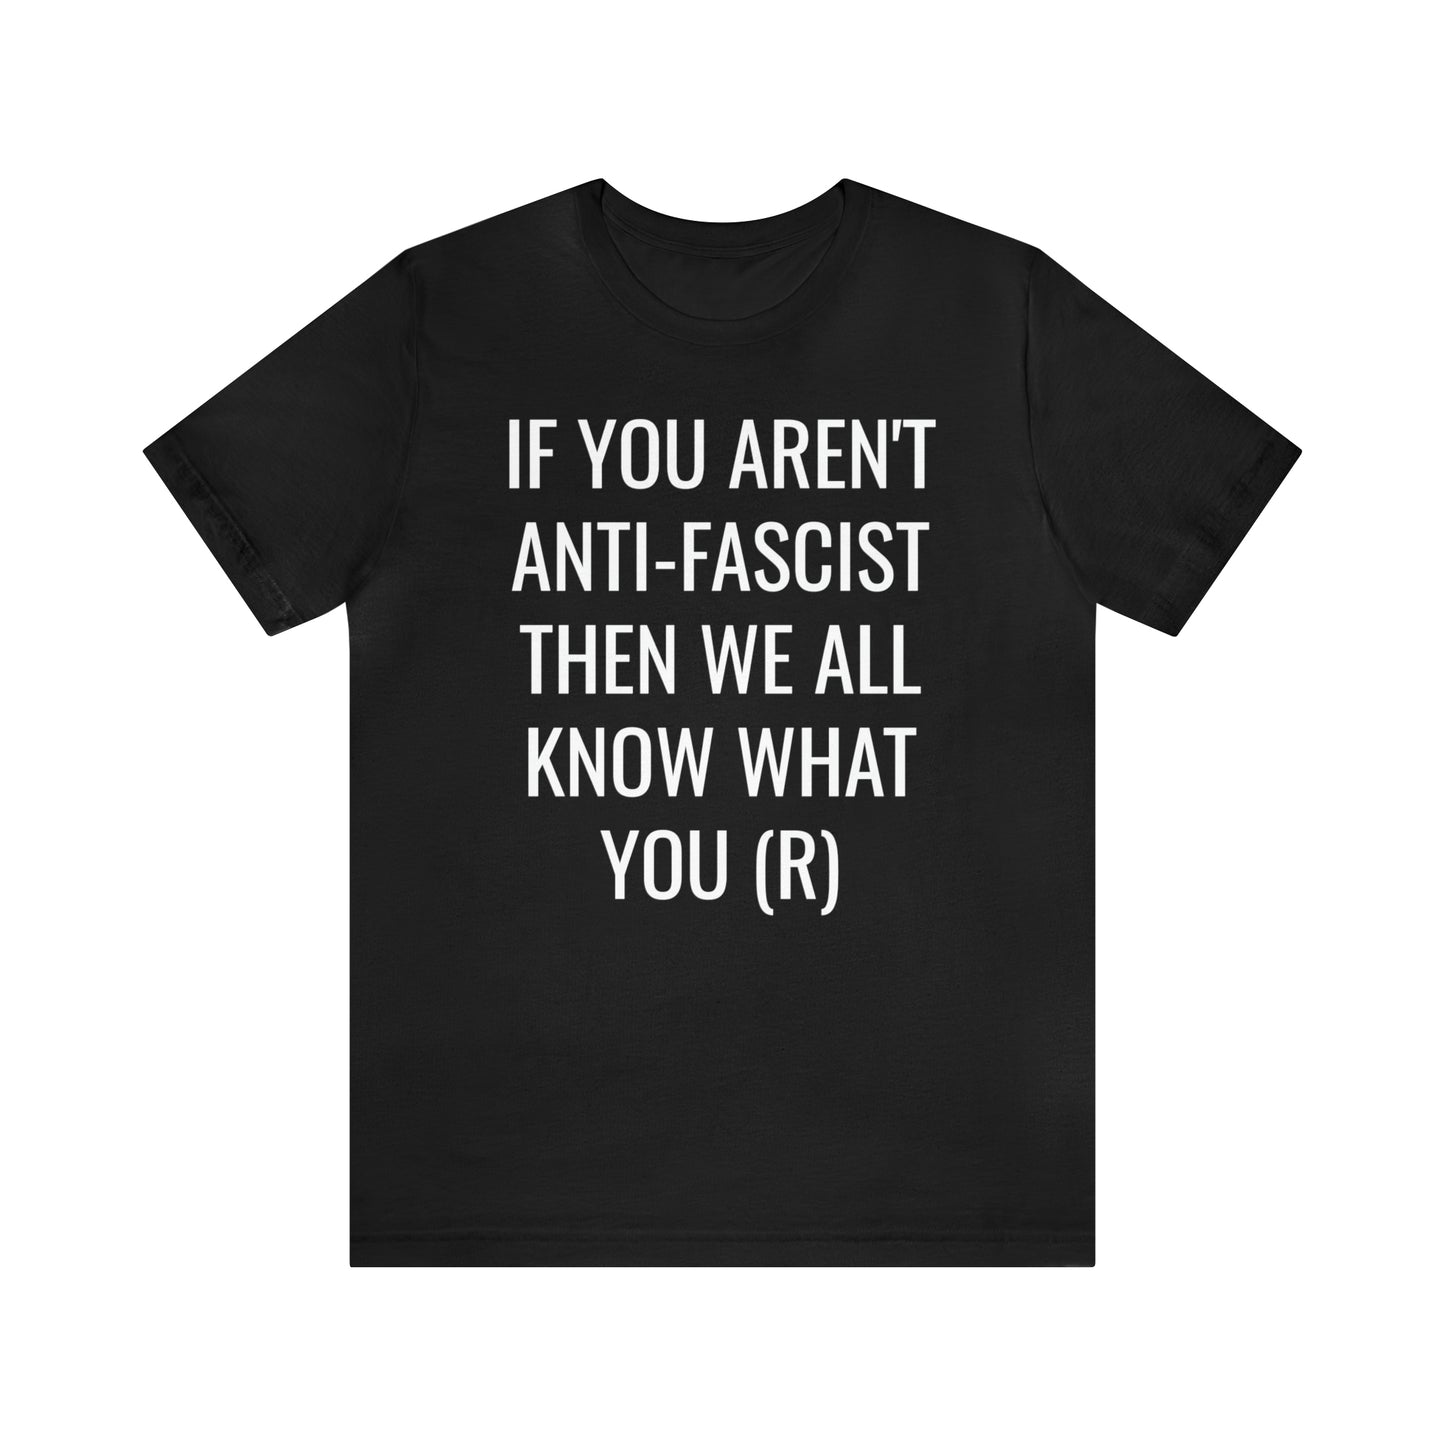 We Know What You (R) Unisex Jersey Short Sleeve Black Tee (SirTalksALot Exclusive)